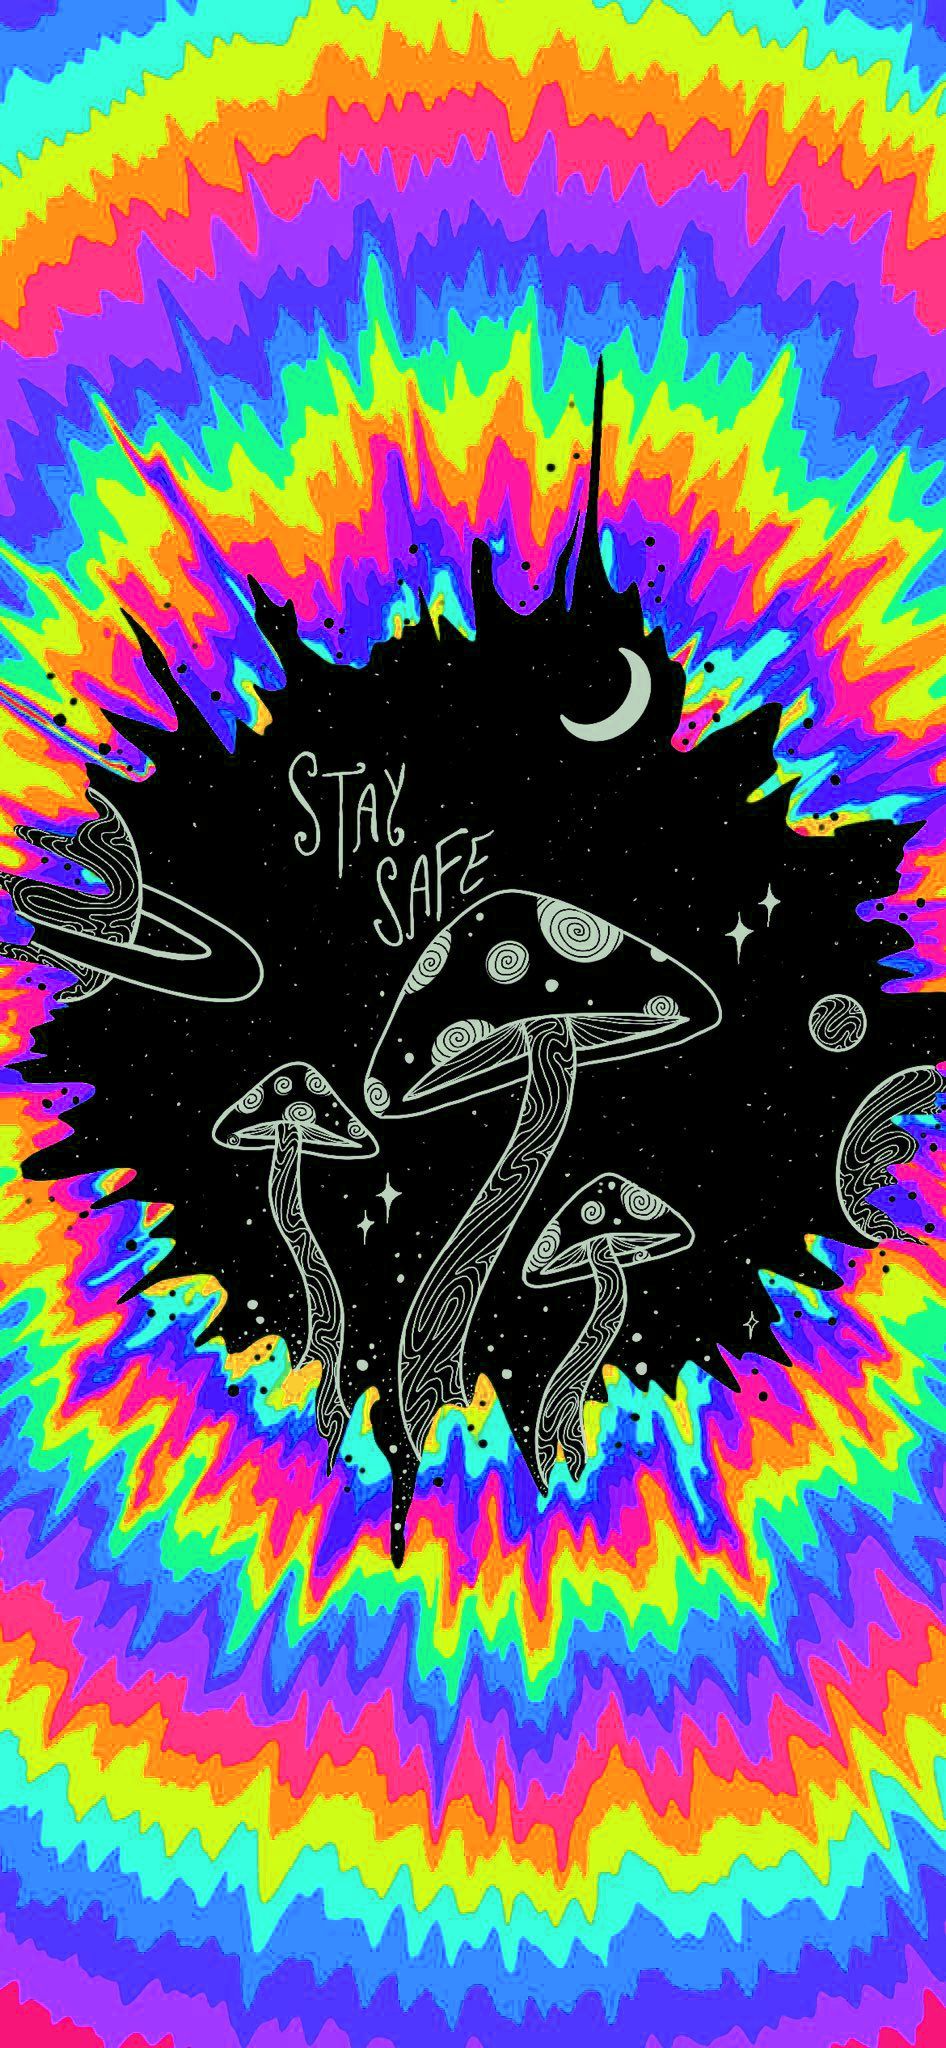 A trippy phone wallpaper I made - Funny, trippy